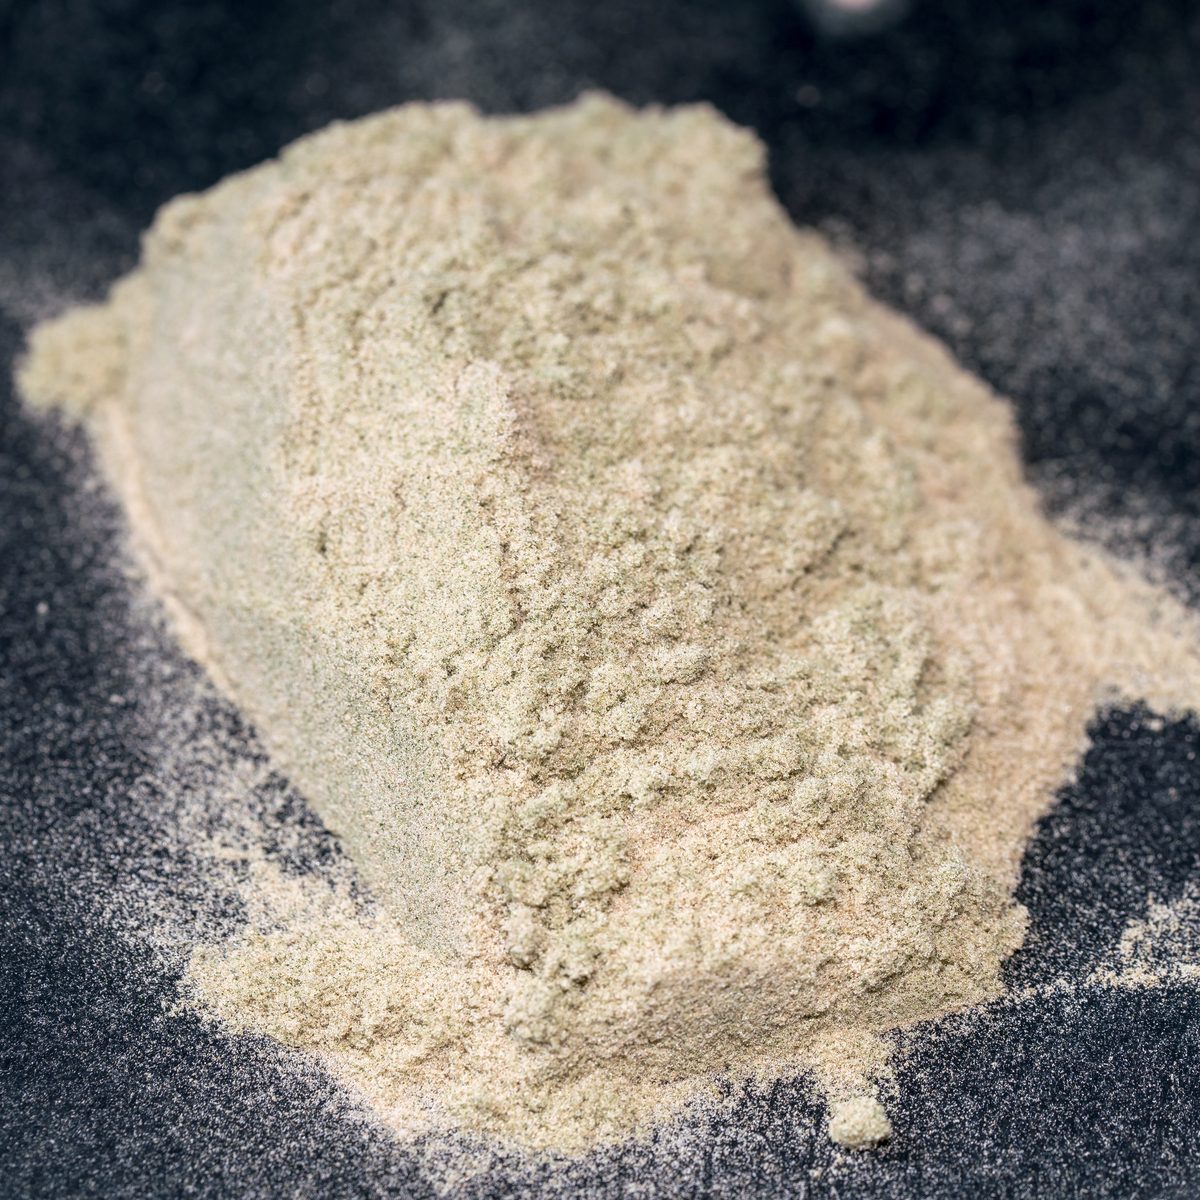 Is it okay for a teenage to use thca isolate powder?